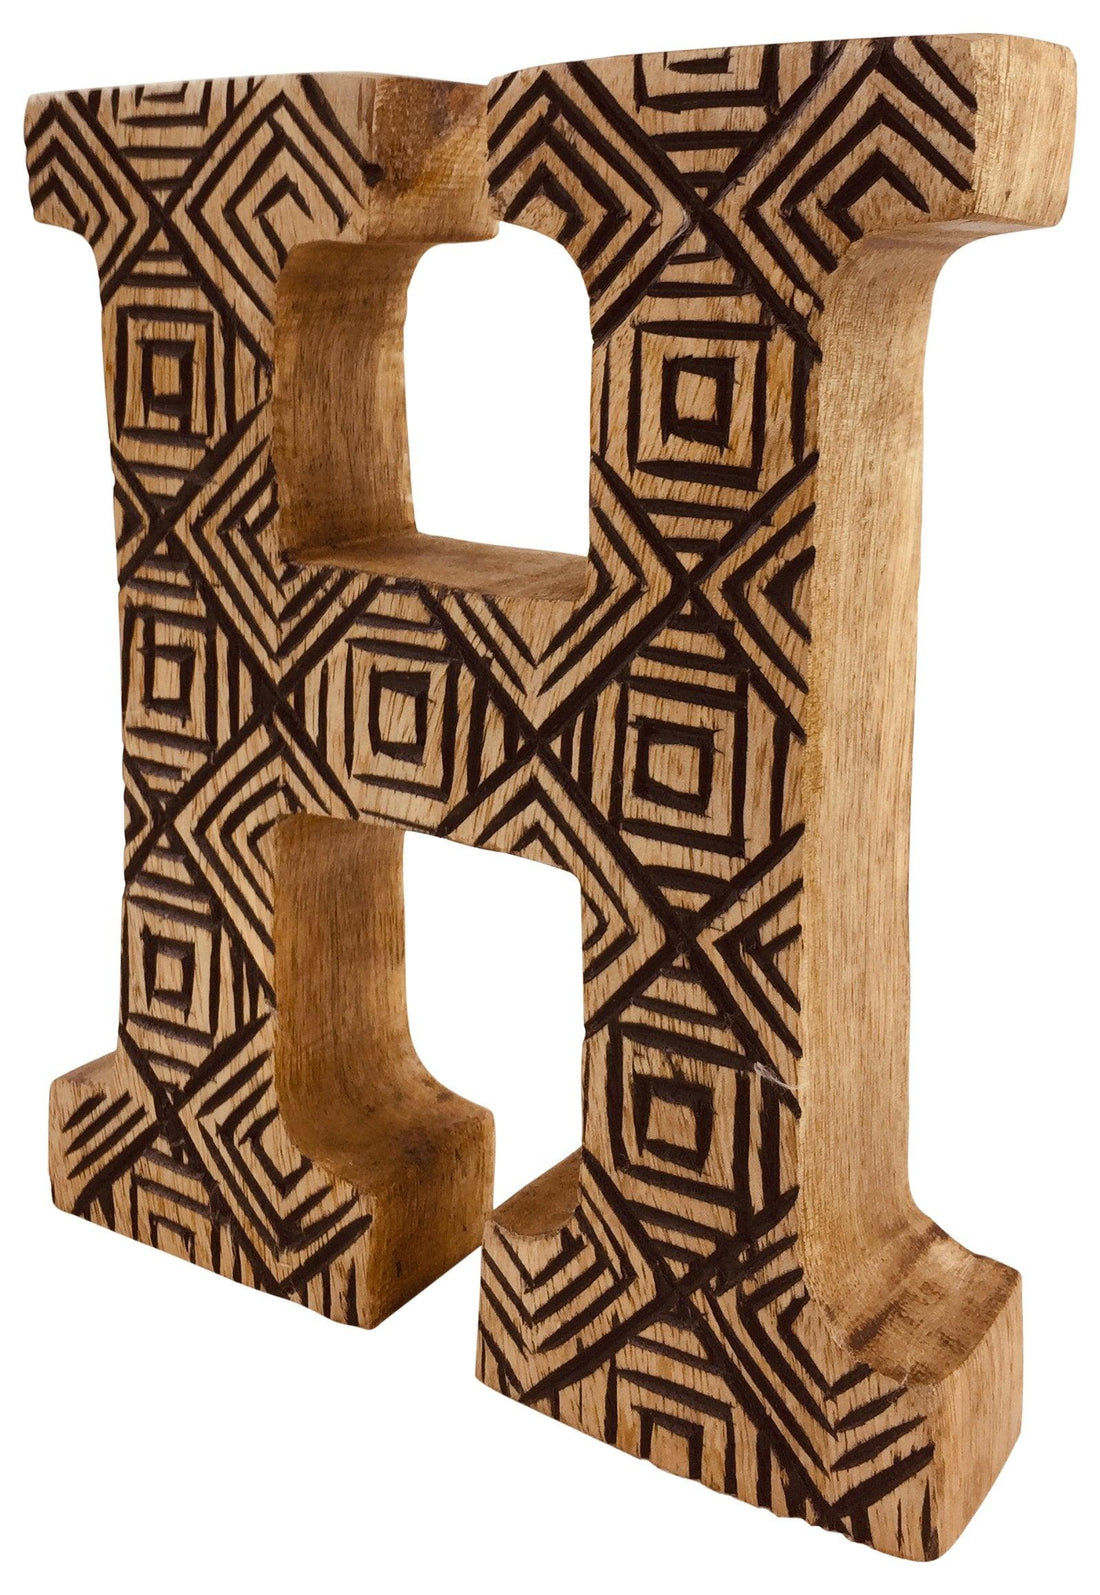 Hand Carved Wooden Geometric Letter H - £12.99 - Single Letters 